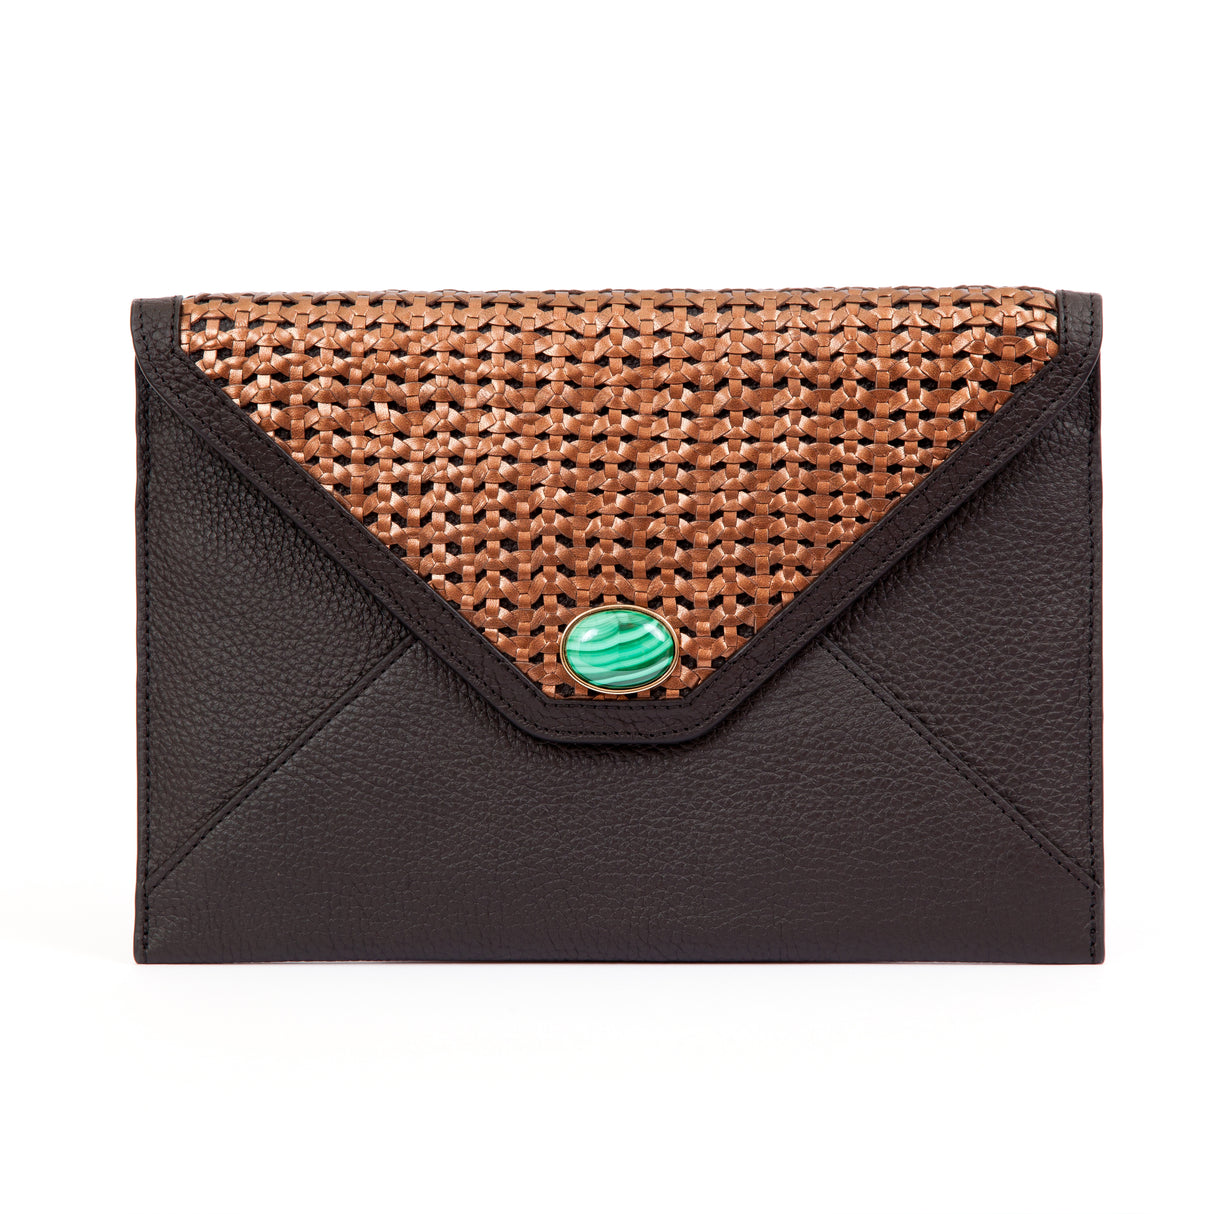 Envelopes of Madame Malachite sealed with her kiss, lined with our signature malachite fabric. Carry the magic of malachite everywhere you go.  %100 Leather with handwoven leather   Jeweled with natural malachite stone, 24K gold plated